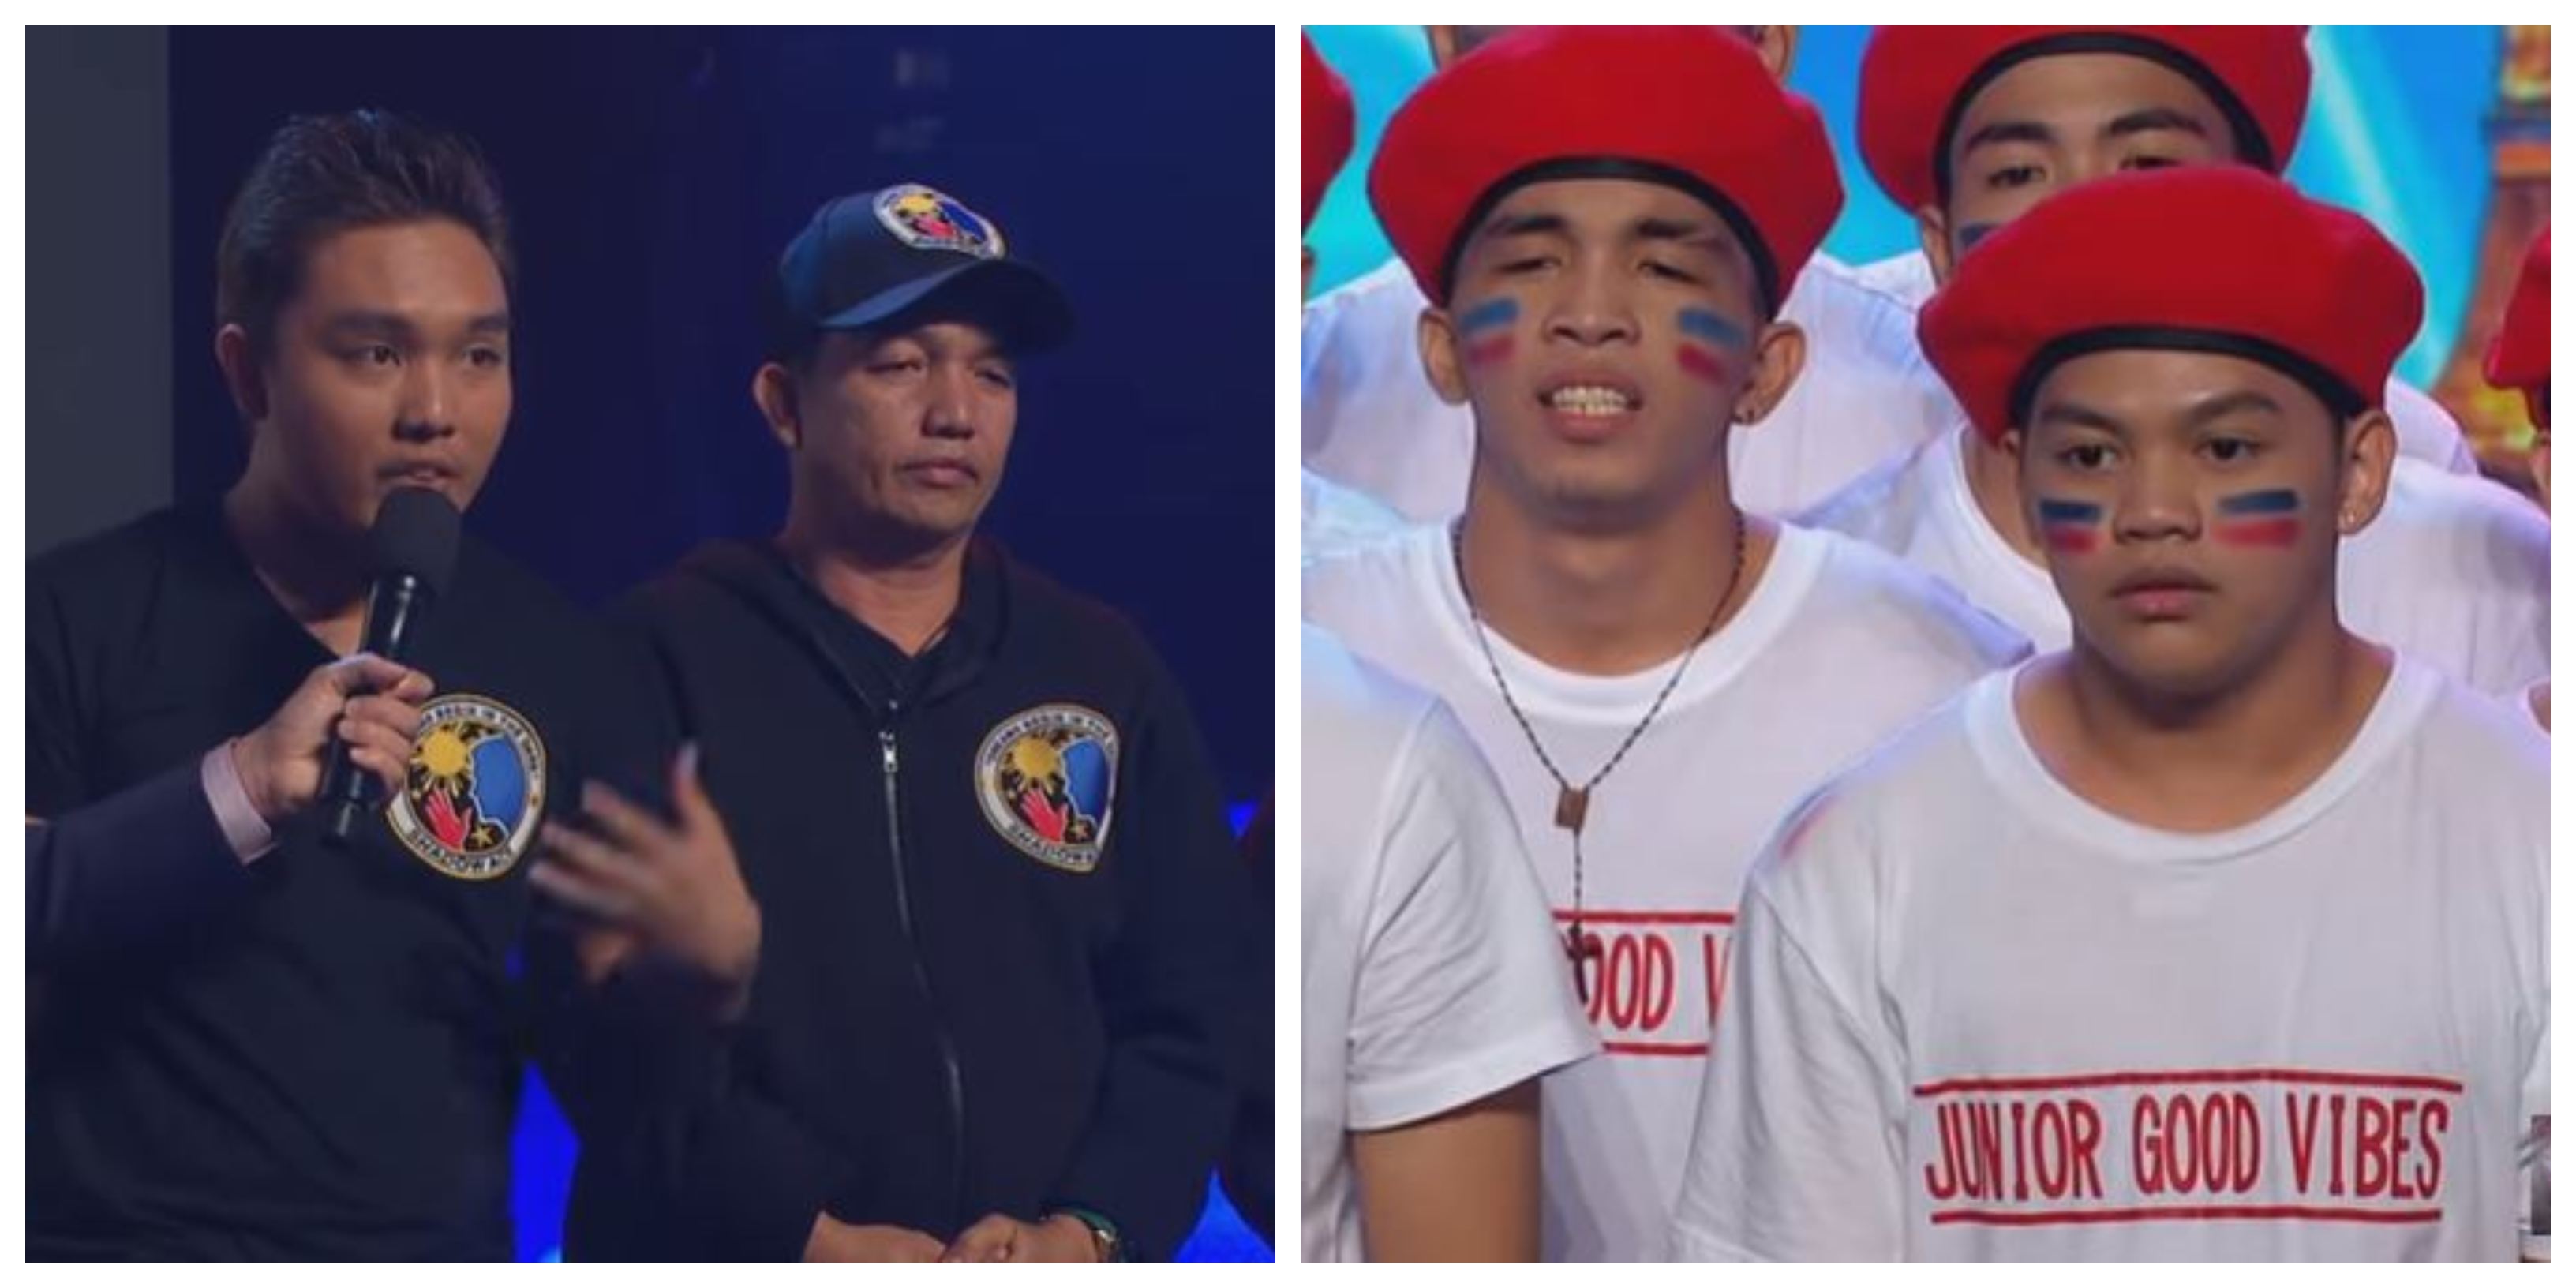 Shadow Ace with his father and members of Junior Good Vibes. Photo: Screenshot from Asia’s Got Talent’s videos